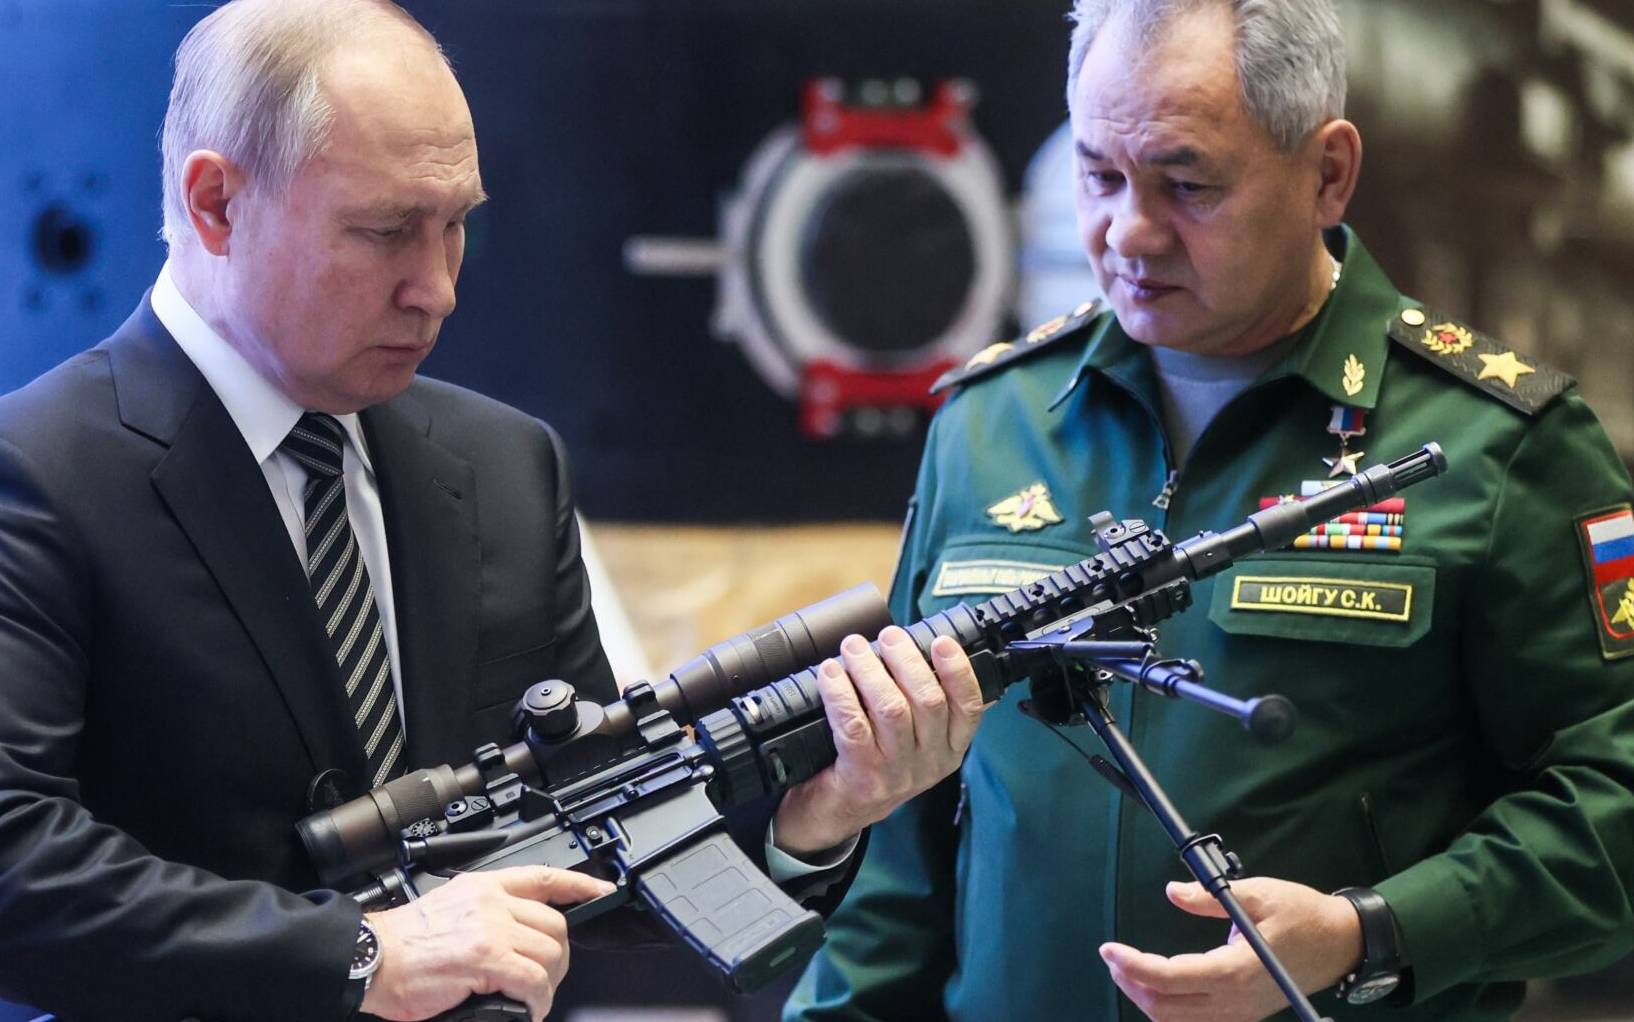 Russian President Vladimir Putin and Defence Minister Sergei Shoigu tour a military gear exhibition before the annual meeting of the Defence Ministry board in Moscow on December 21, 2021. (Photo by Mikhail METZEL / SPUTNIK / AFP)